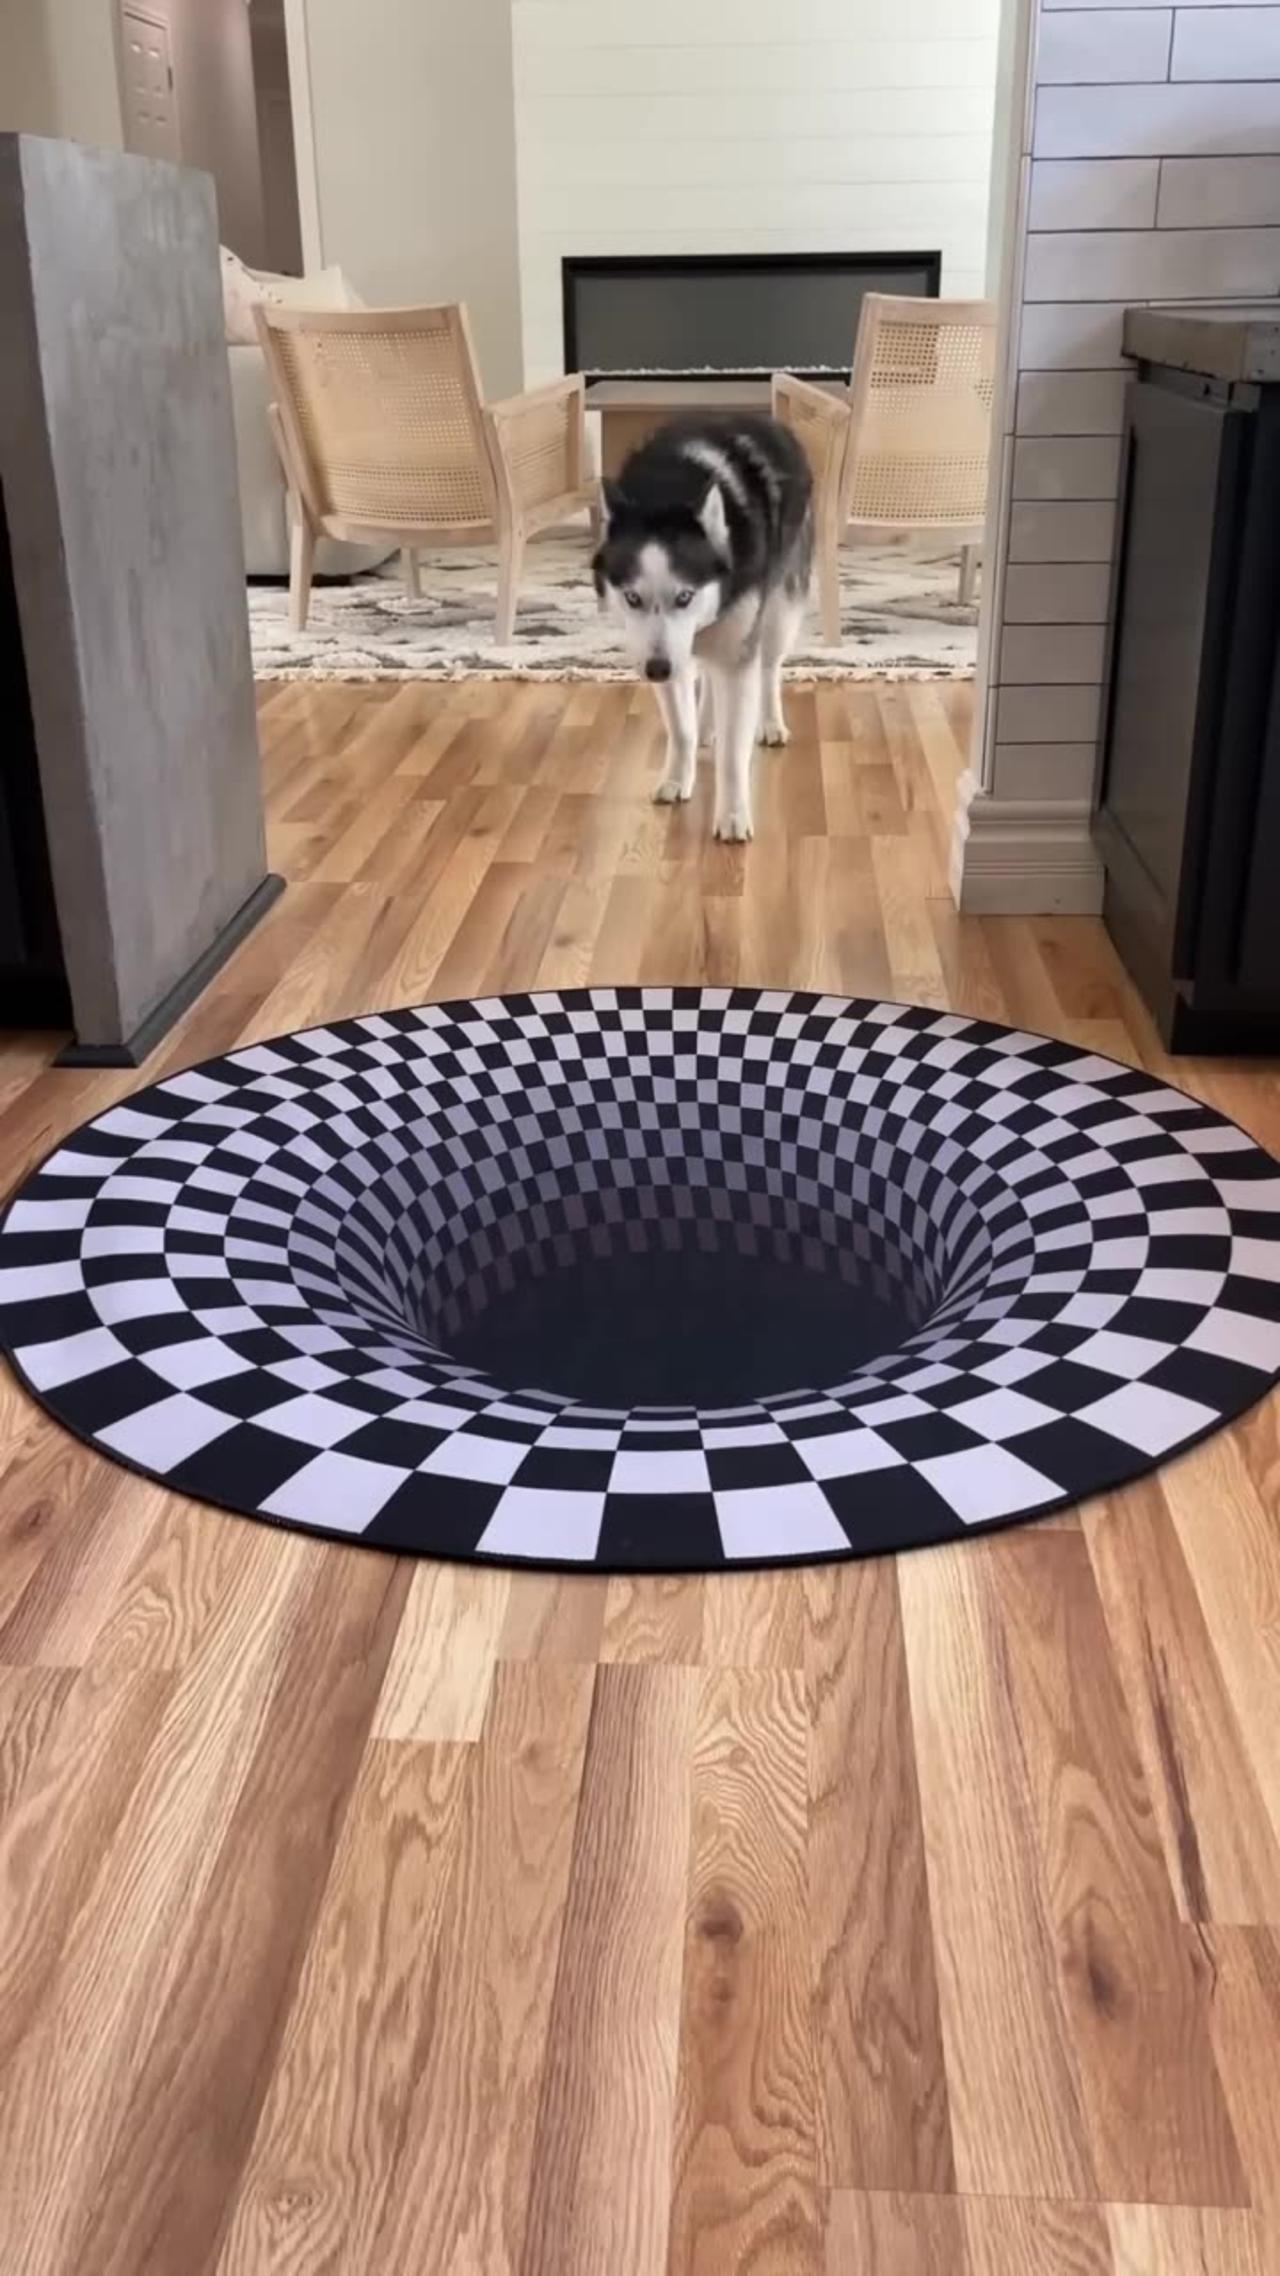 Dogs funny reaction to entering optical illusion rug!